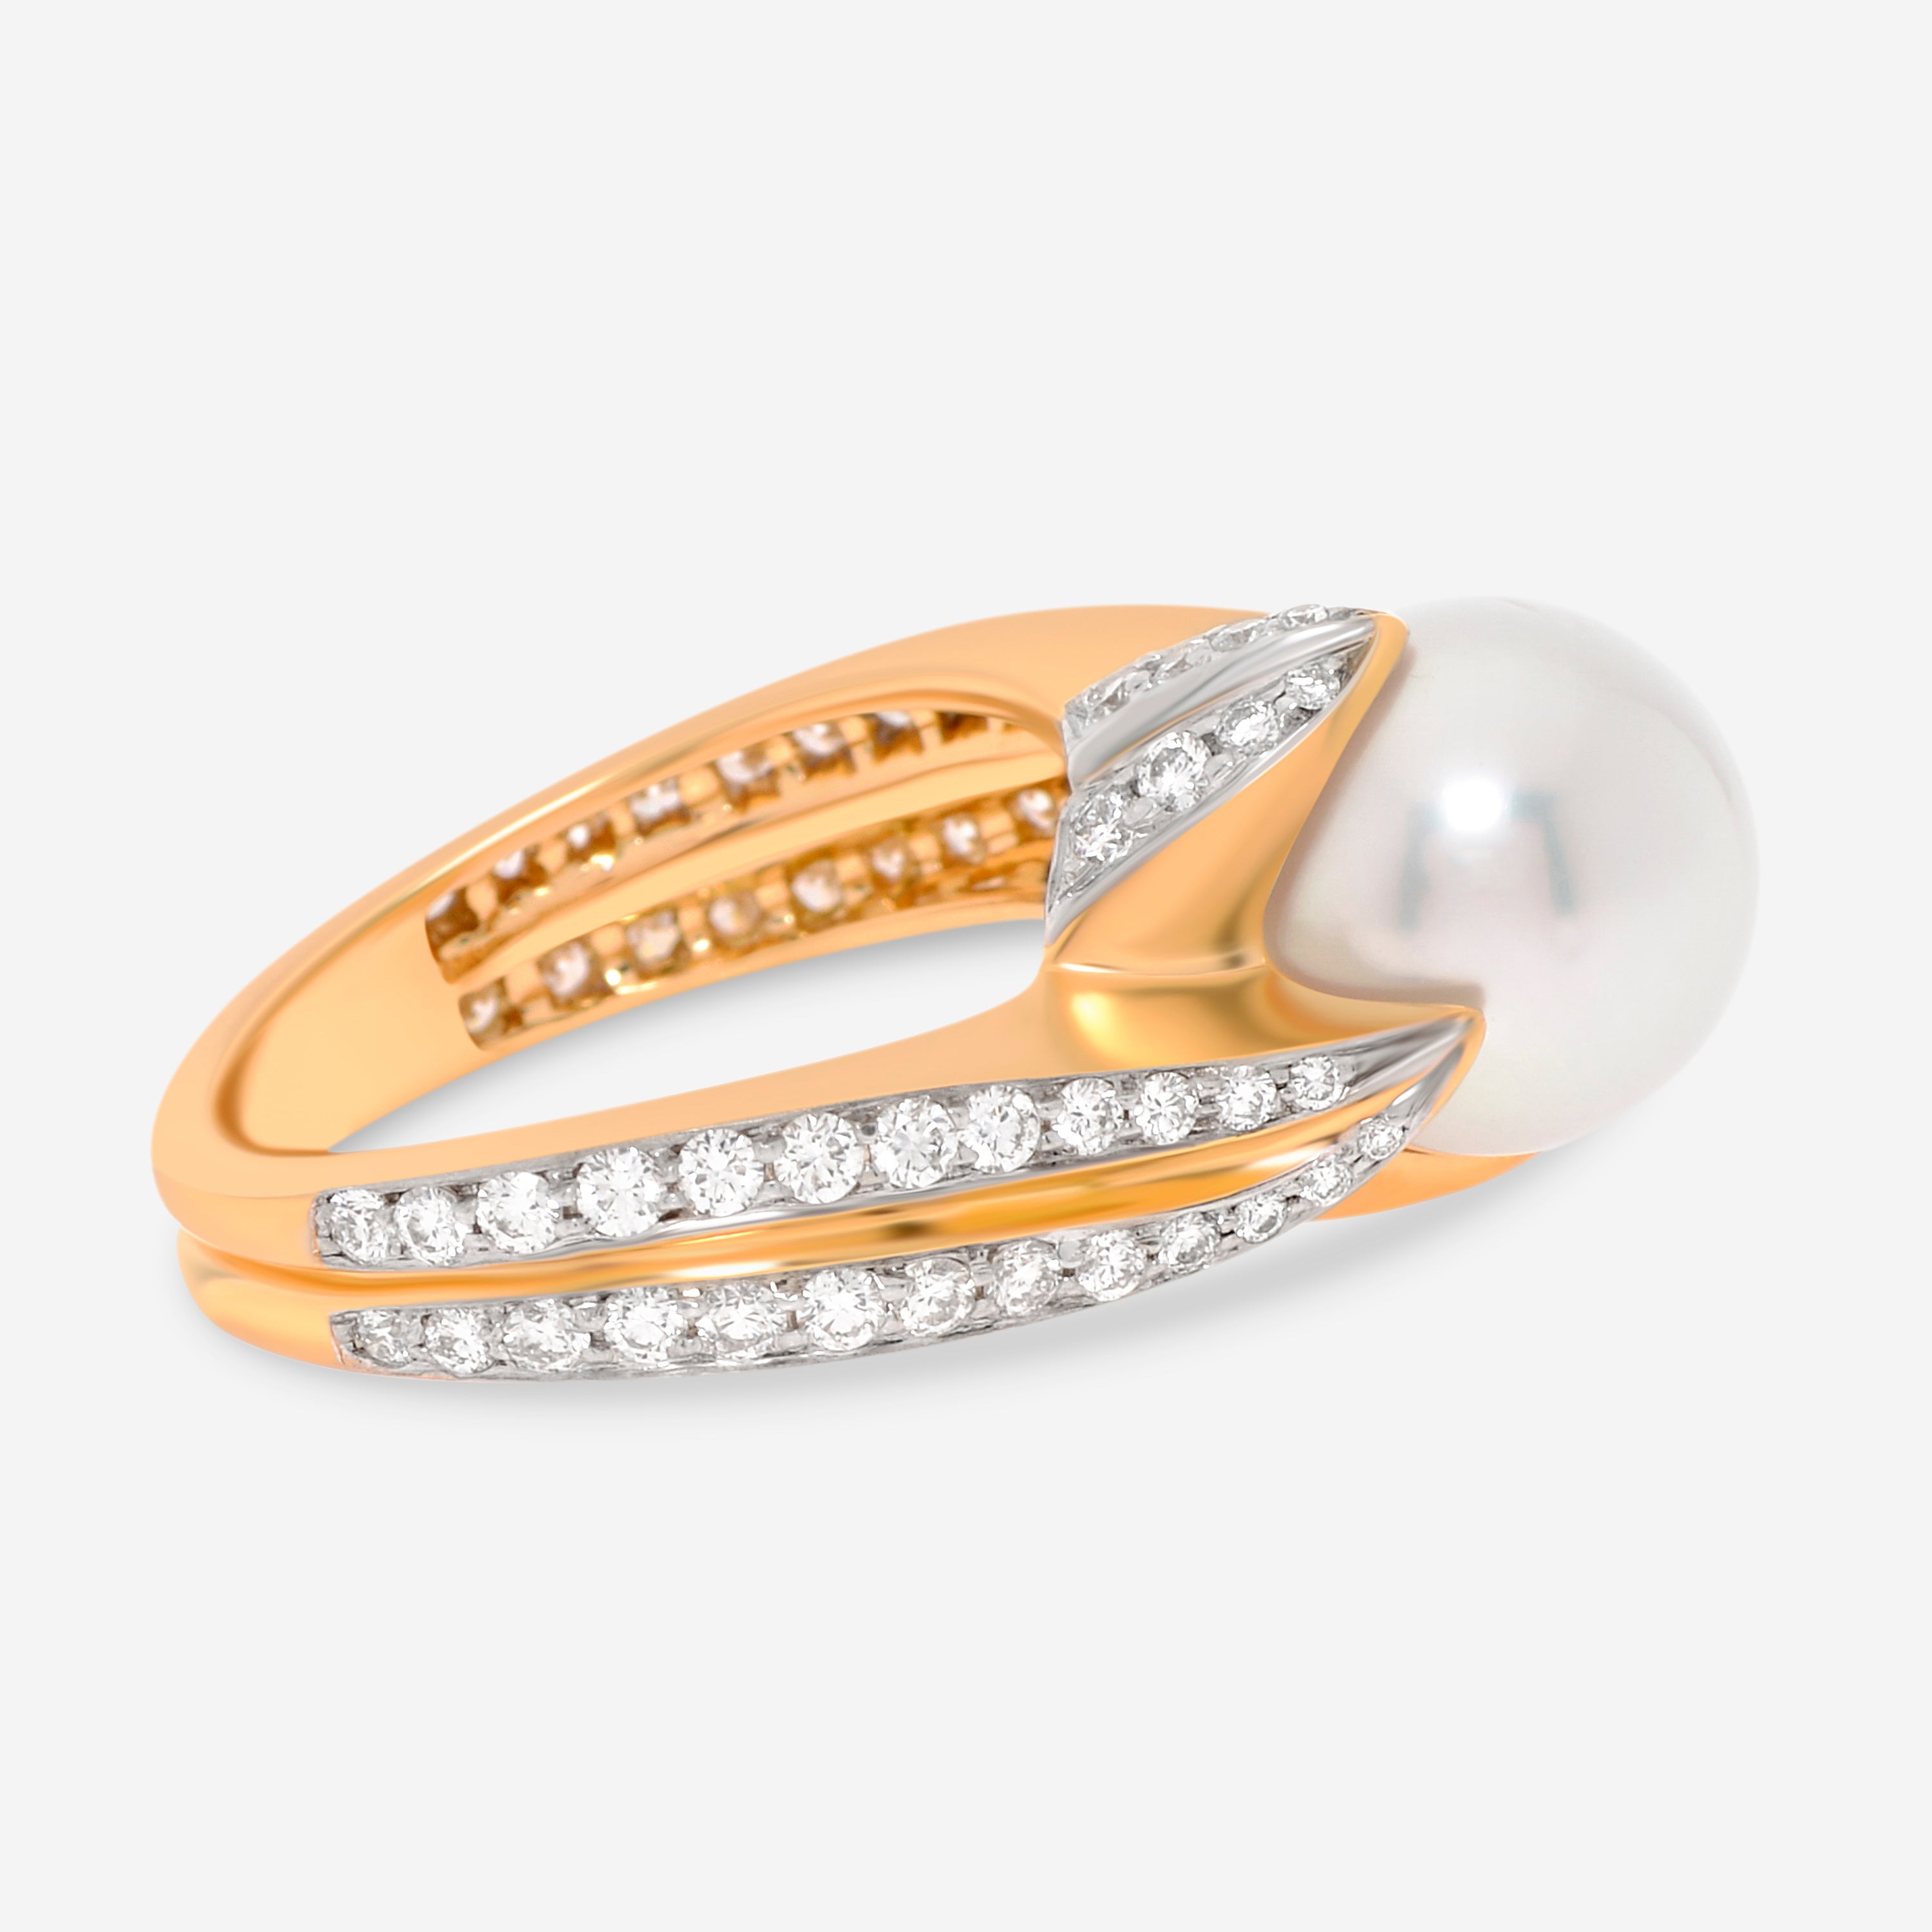 Assael Angela Cummings 18K Yellow Gold, South Sea Cultured Pearl and Diamond 0.89ct. tw. Band Ring Sz. 6.5 ACR0004 - THE SOLIST